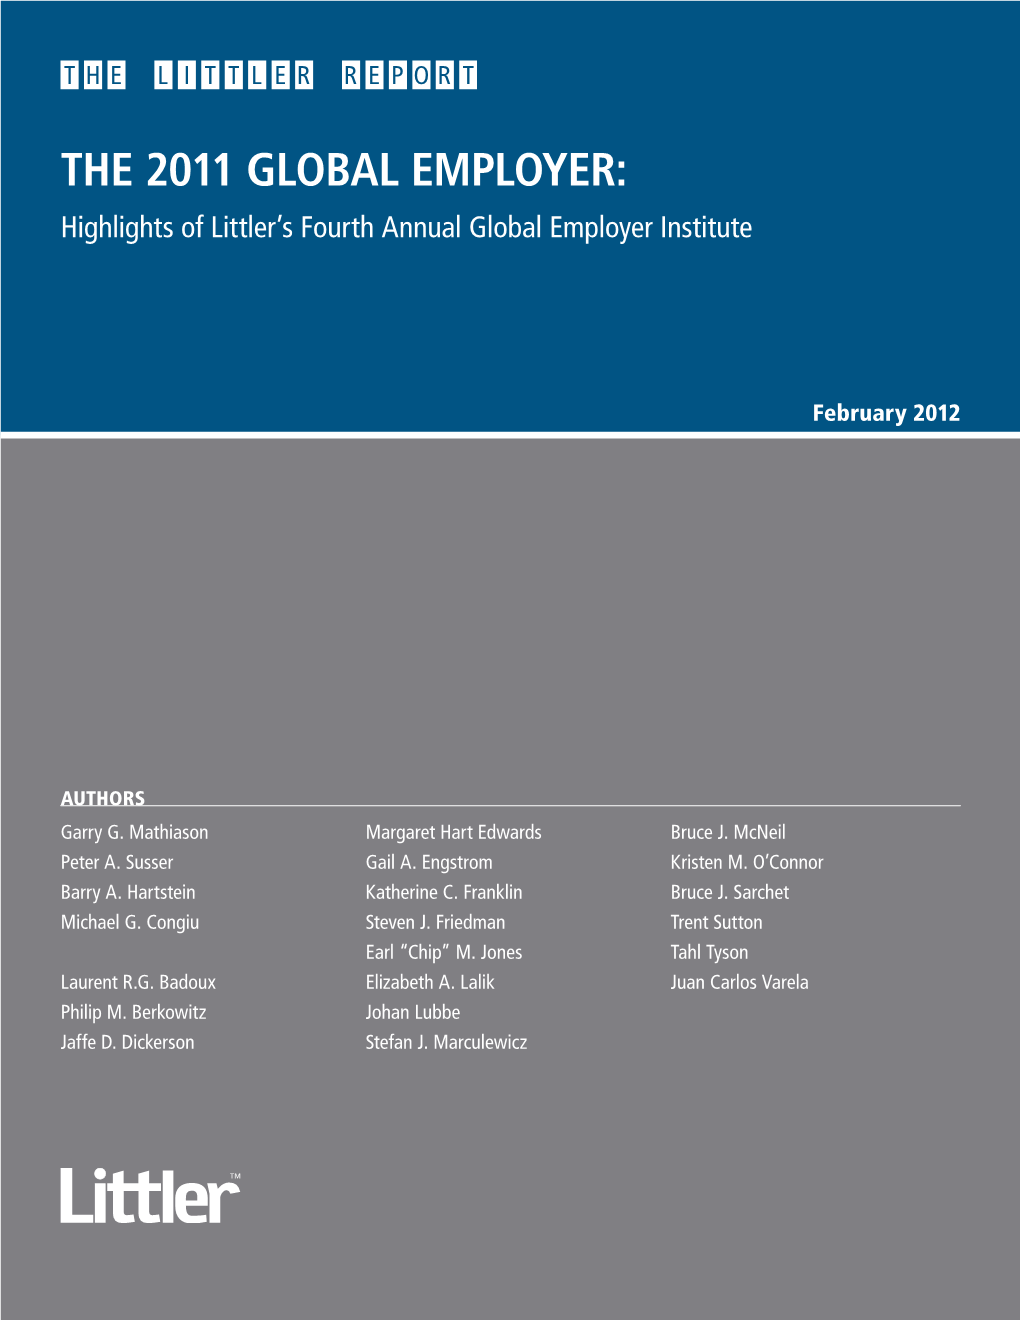 THE 2011 GLOBAL EMPLOYER: Highlights of Littler’S Fourth Annual Global Employer Institute